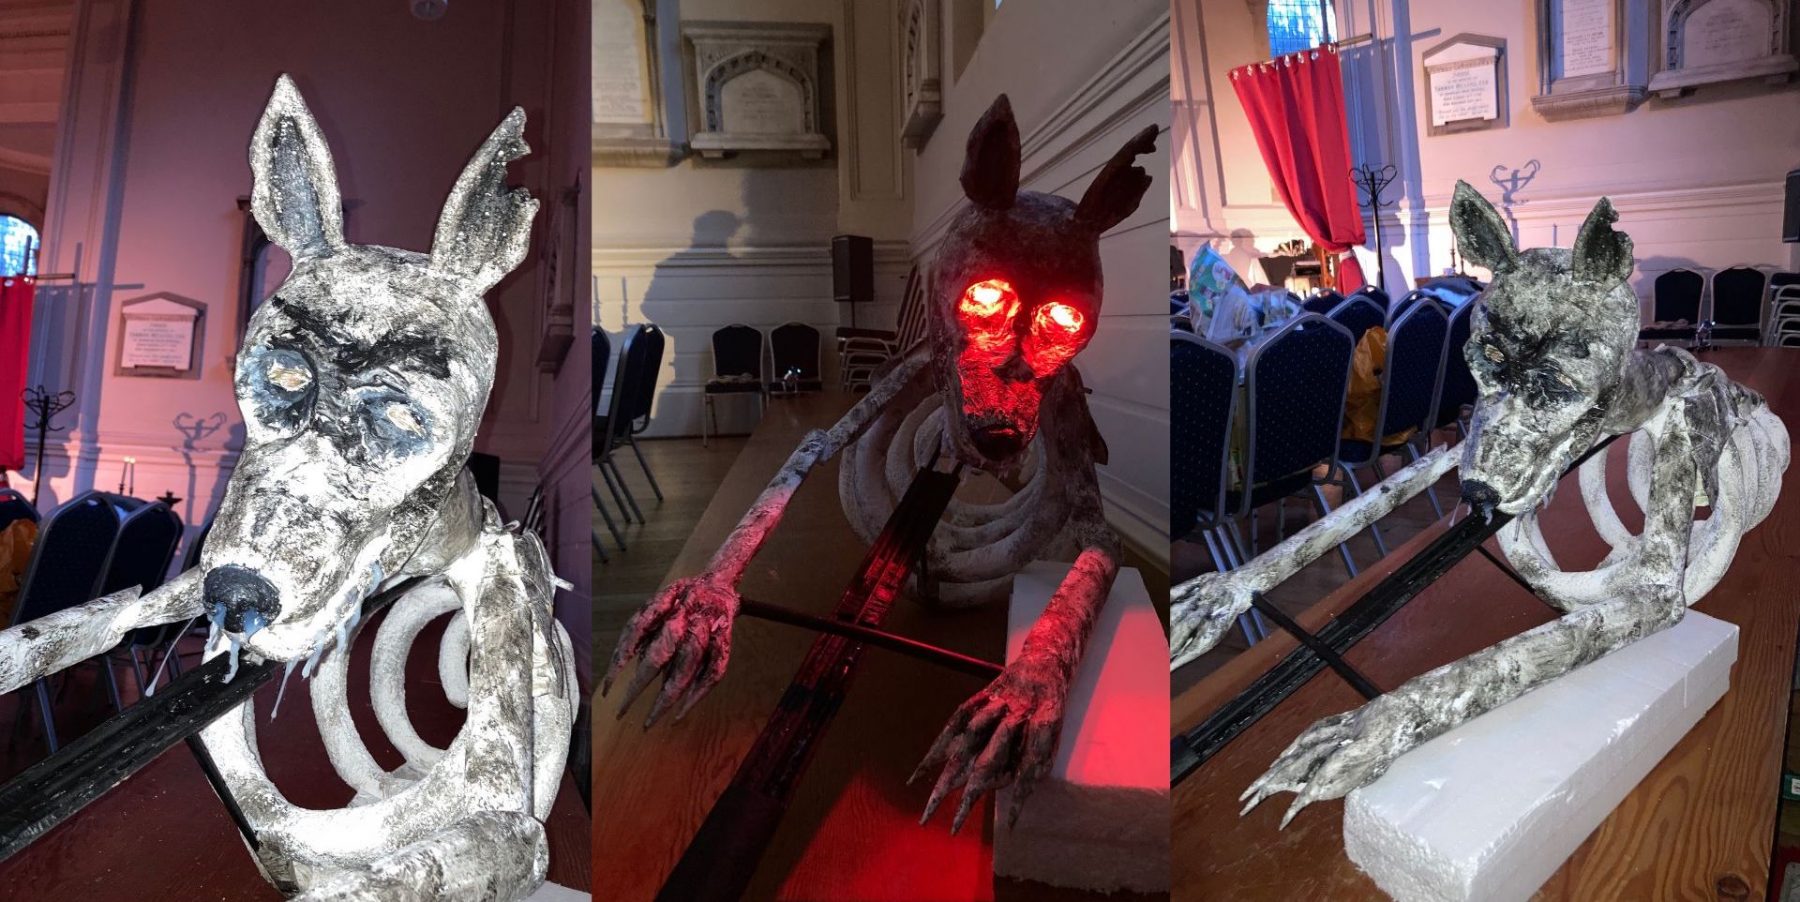 The Hounds of Baskerville - The final state of the Hound puppet, I painted in some deep shadows, added some hot glue drool, and placed some red LED lights in the eyes to make it extra spooky